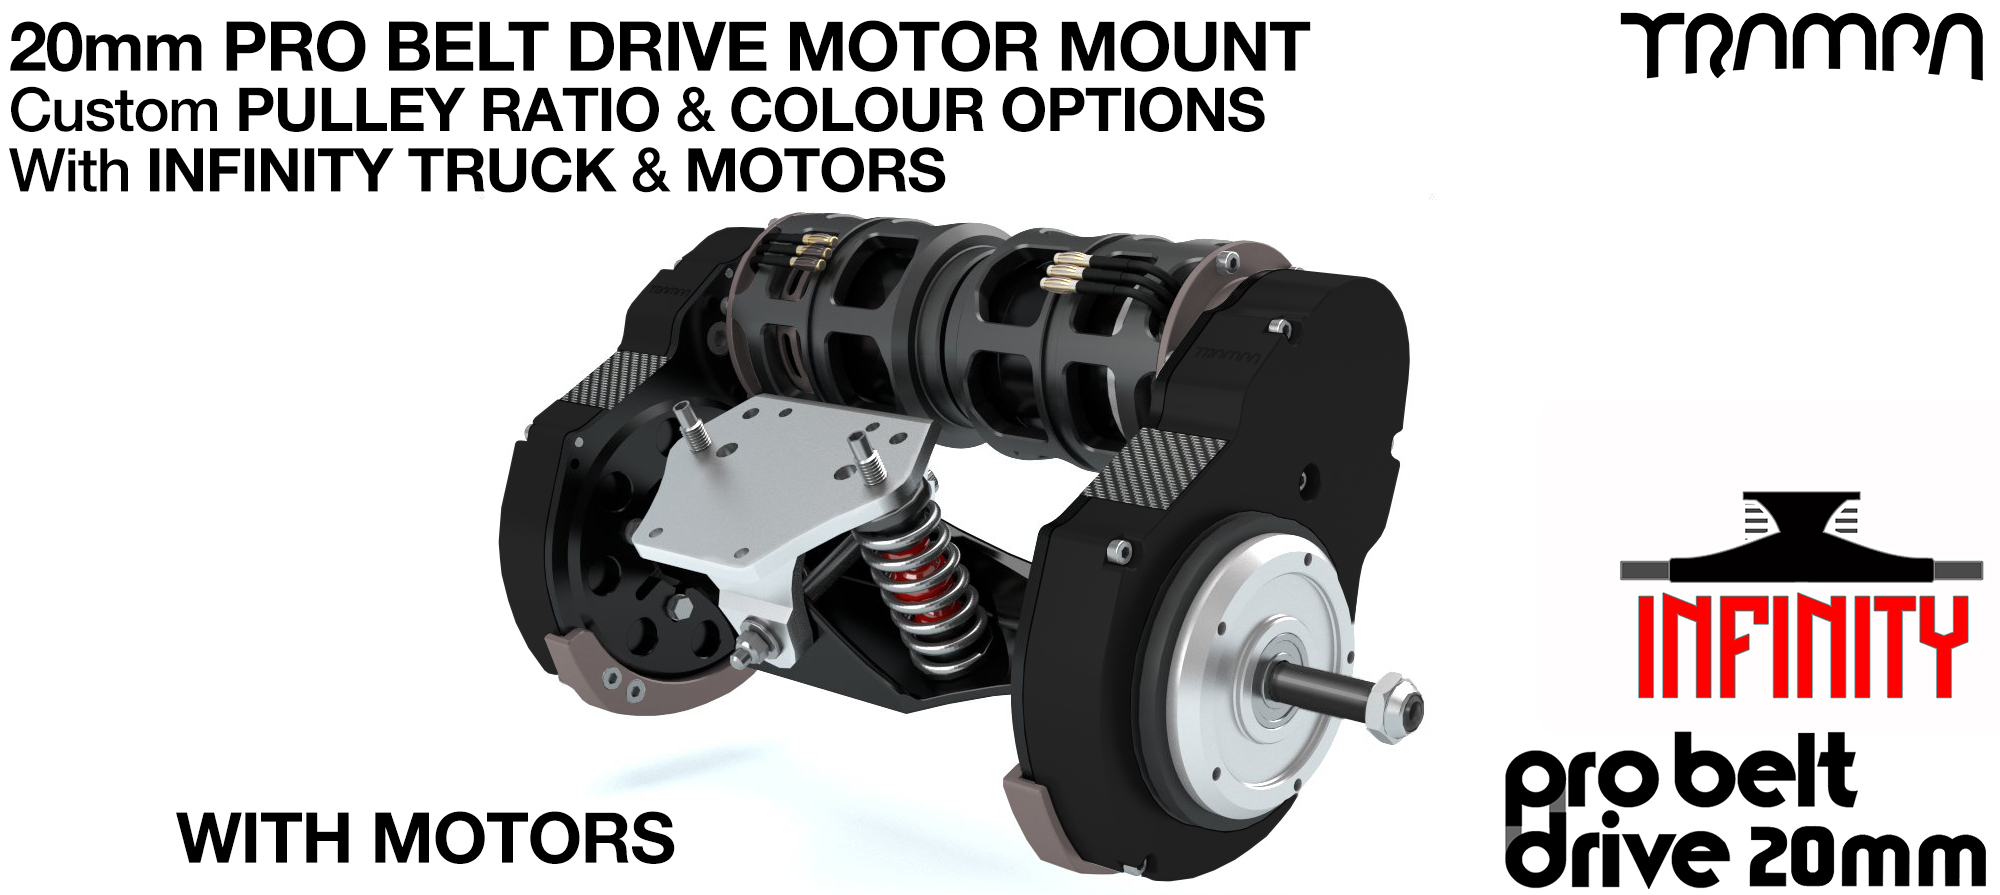 20mm PRO BELT DRIVE Motor Mounts MOTORS, PULLEYS & Motor PROTECTION FILTERS mounted on a CNC TRUCK 